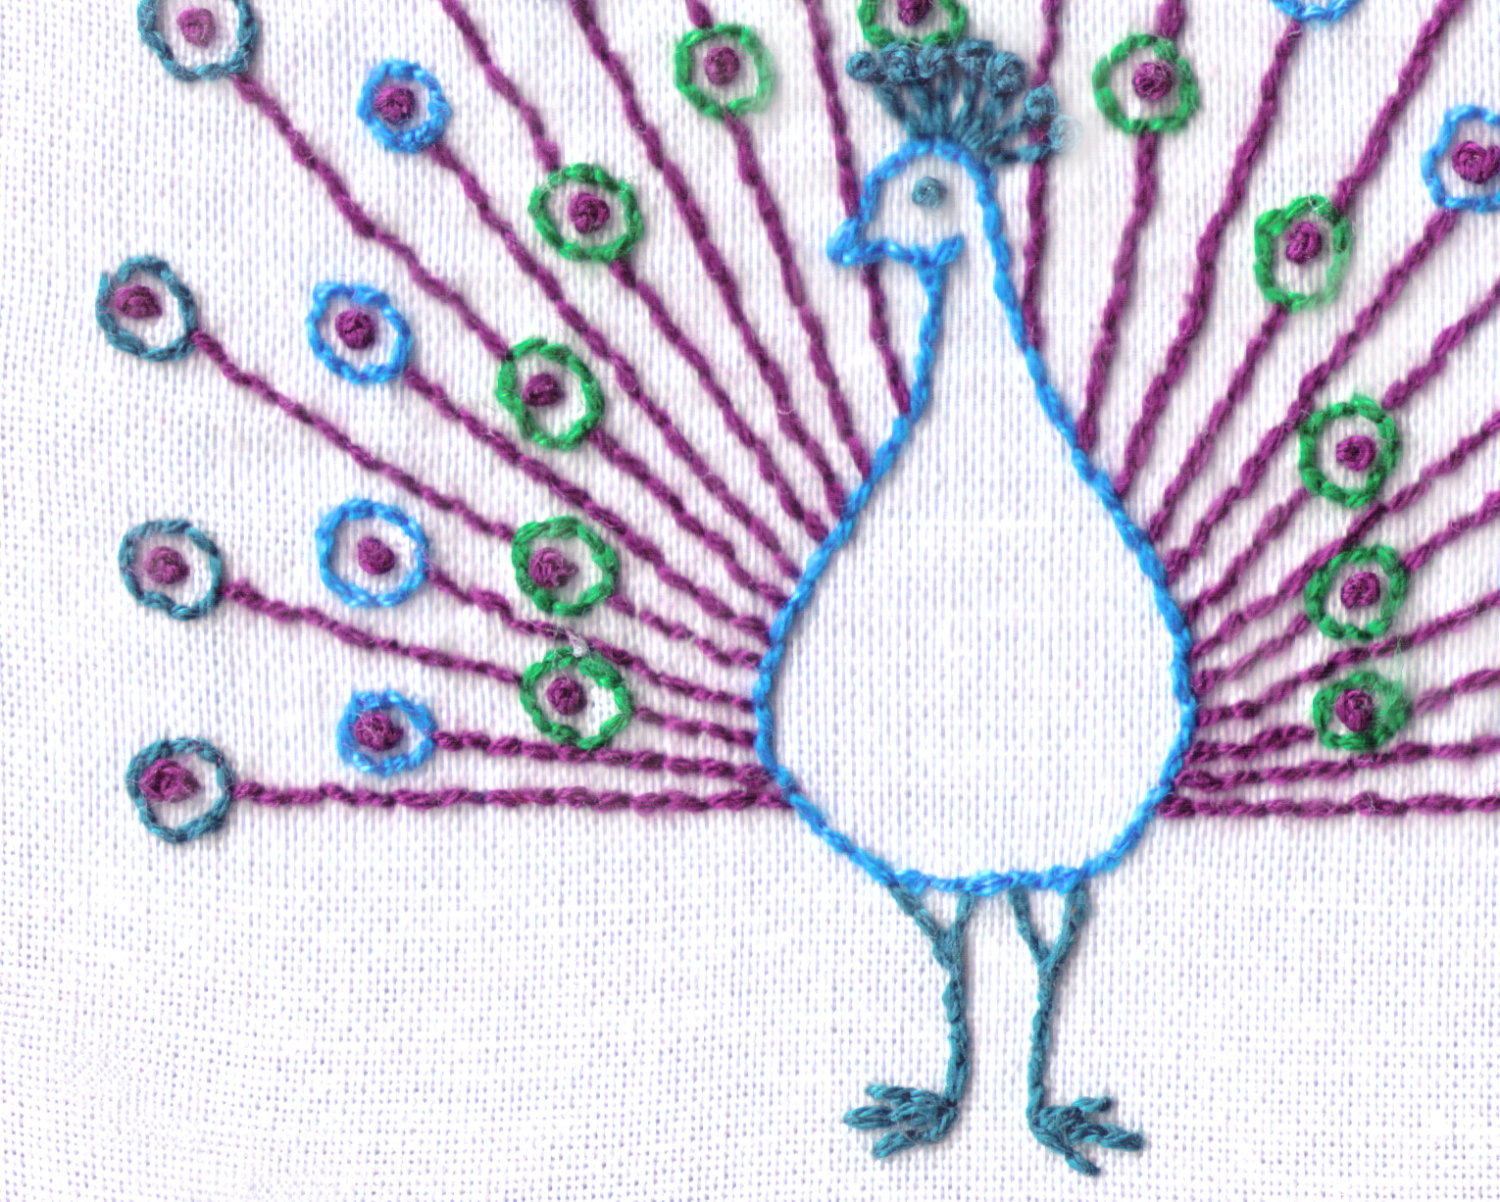 Peacock Hand Embroidery Pattern Peacock Hand Embroidery Pattern 1960s Mod Pdf